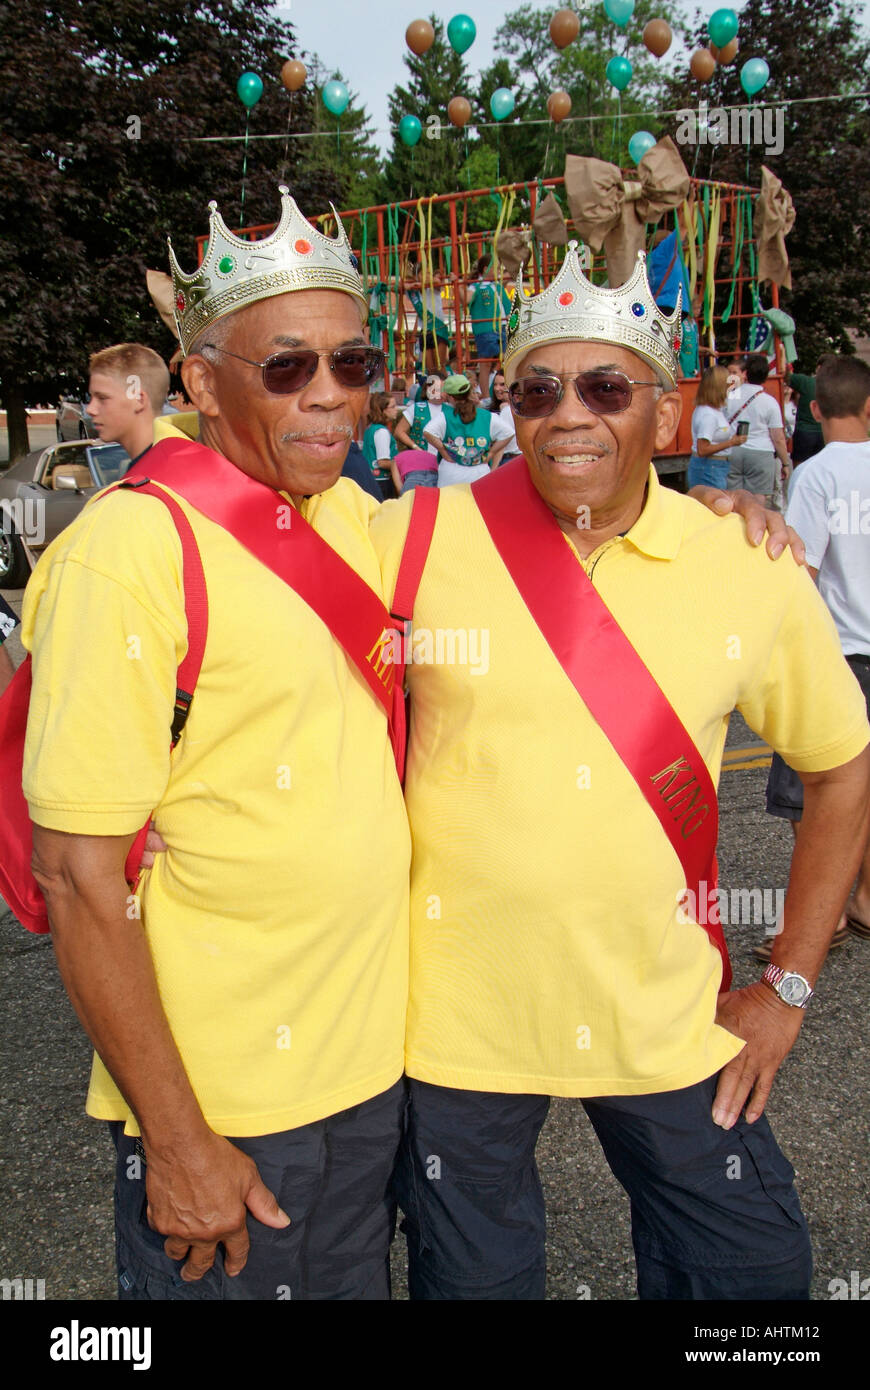 Ethnic Twins Convention at Twinsburg Ohio Stock Photo